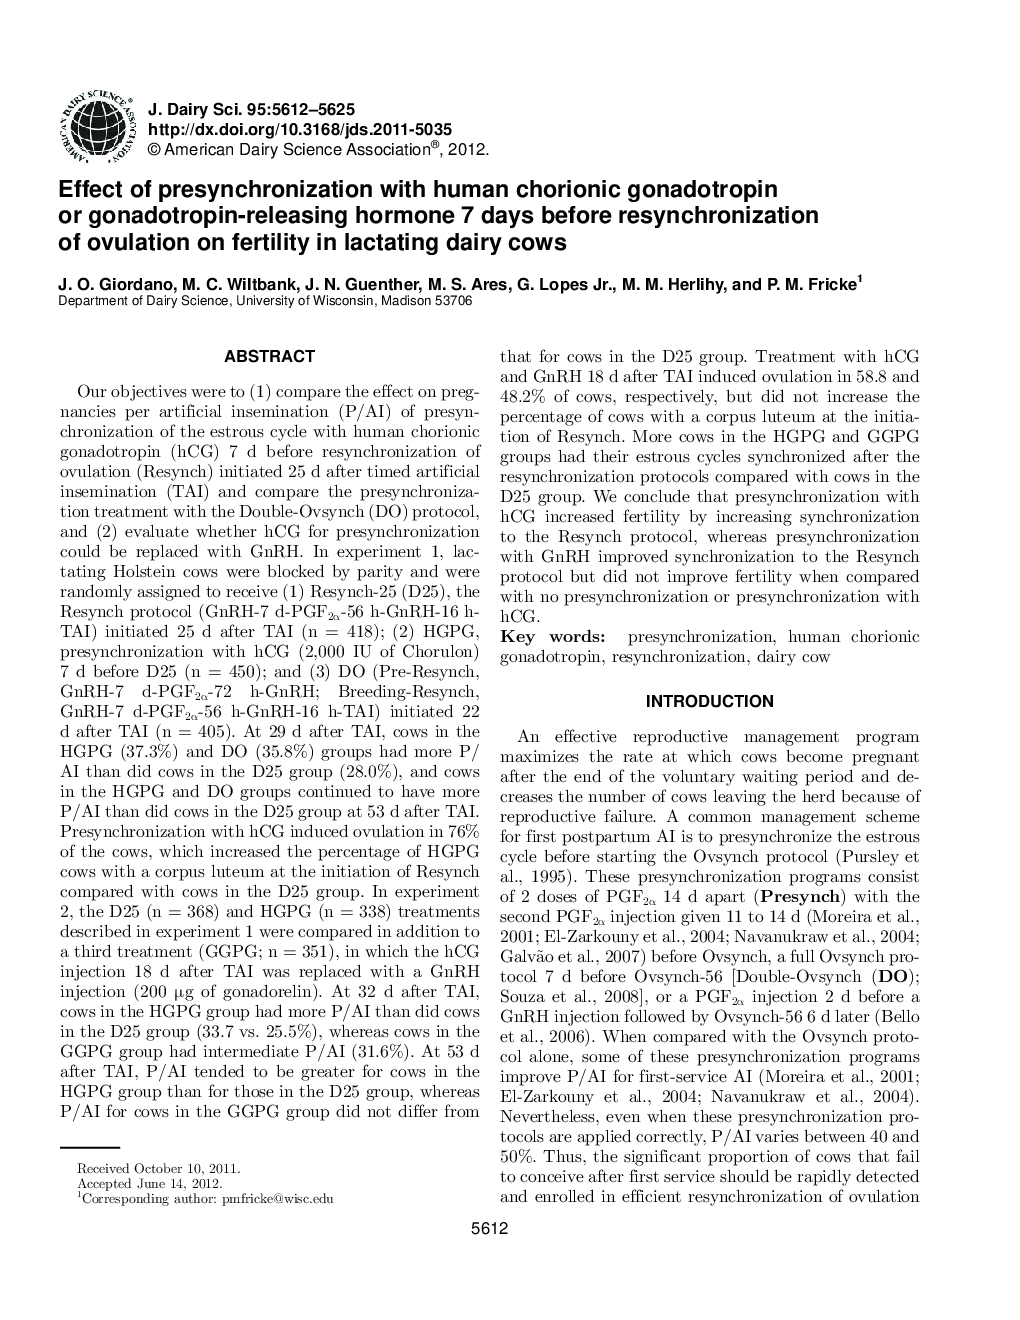 Effect of presynchronization with human chorionic gonadotropin or gonadotropin-releasing hormone 7 days before resynchronization of ovulation on fertility in lactating dairy cows